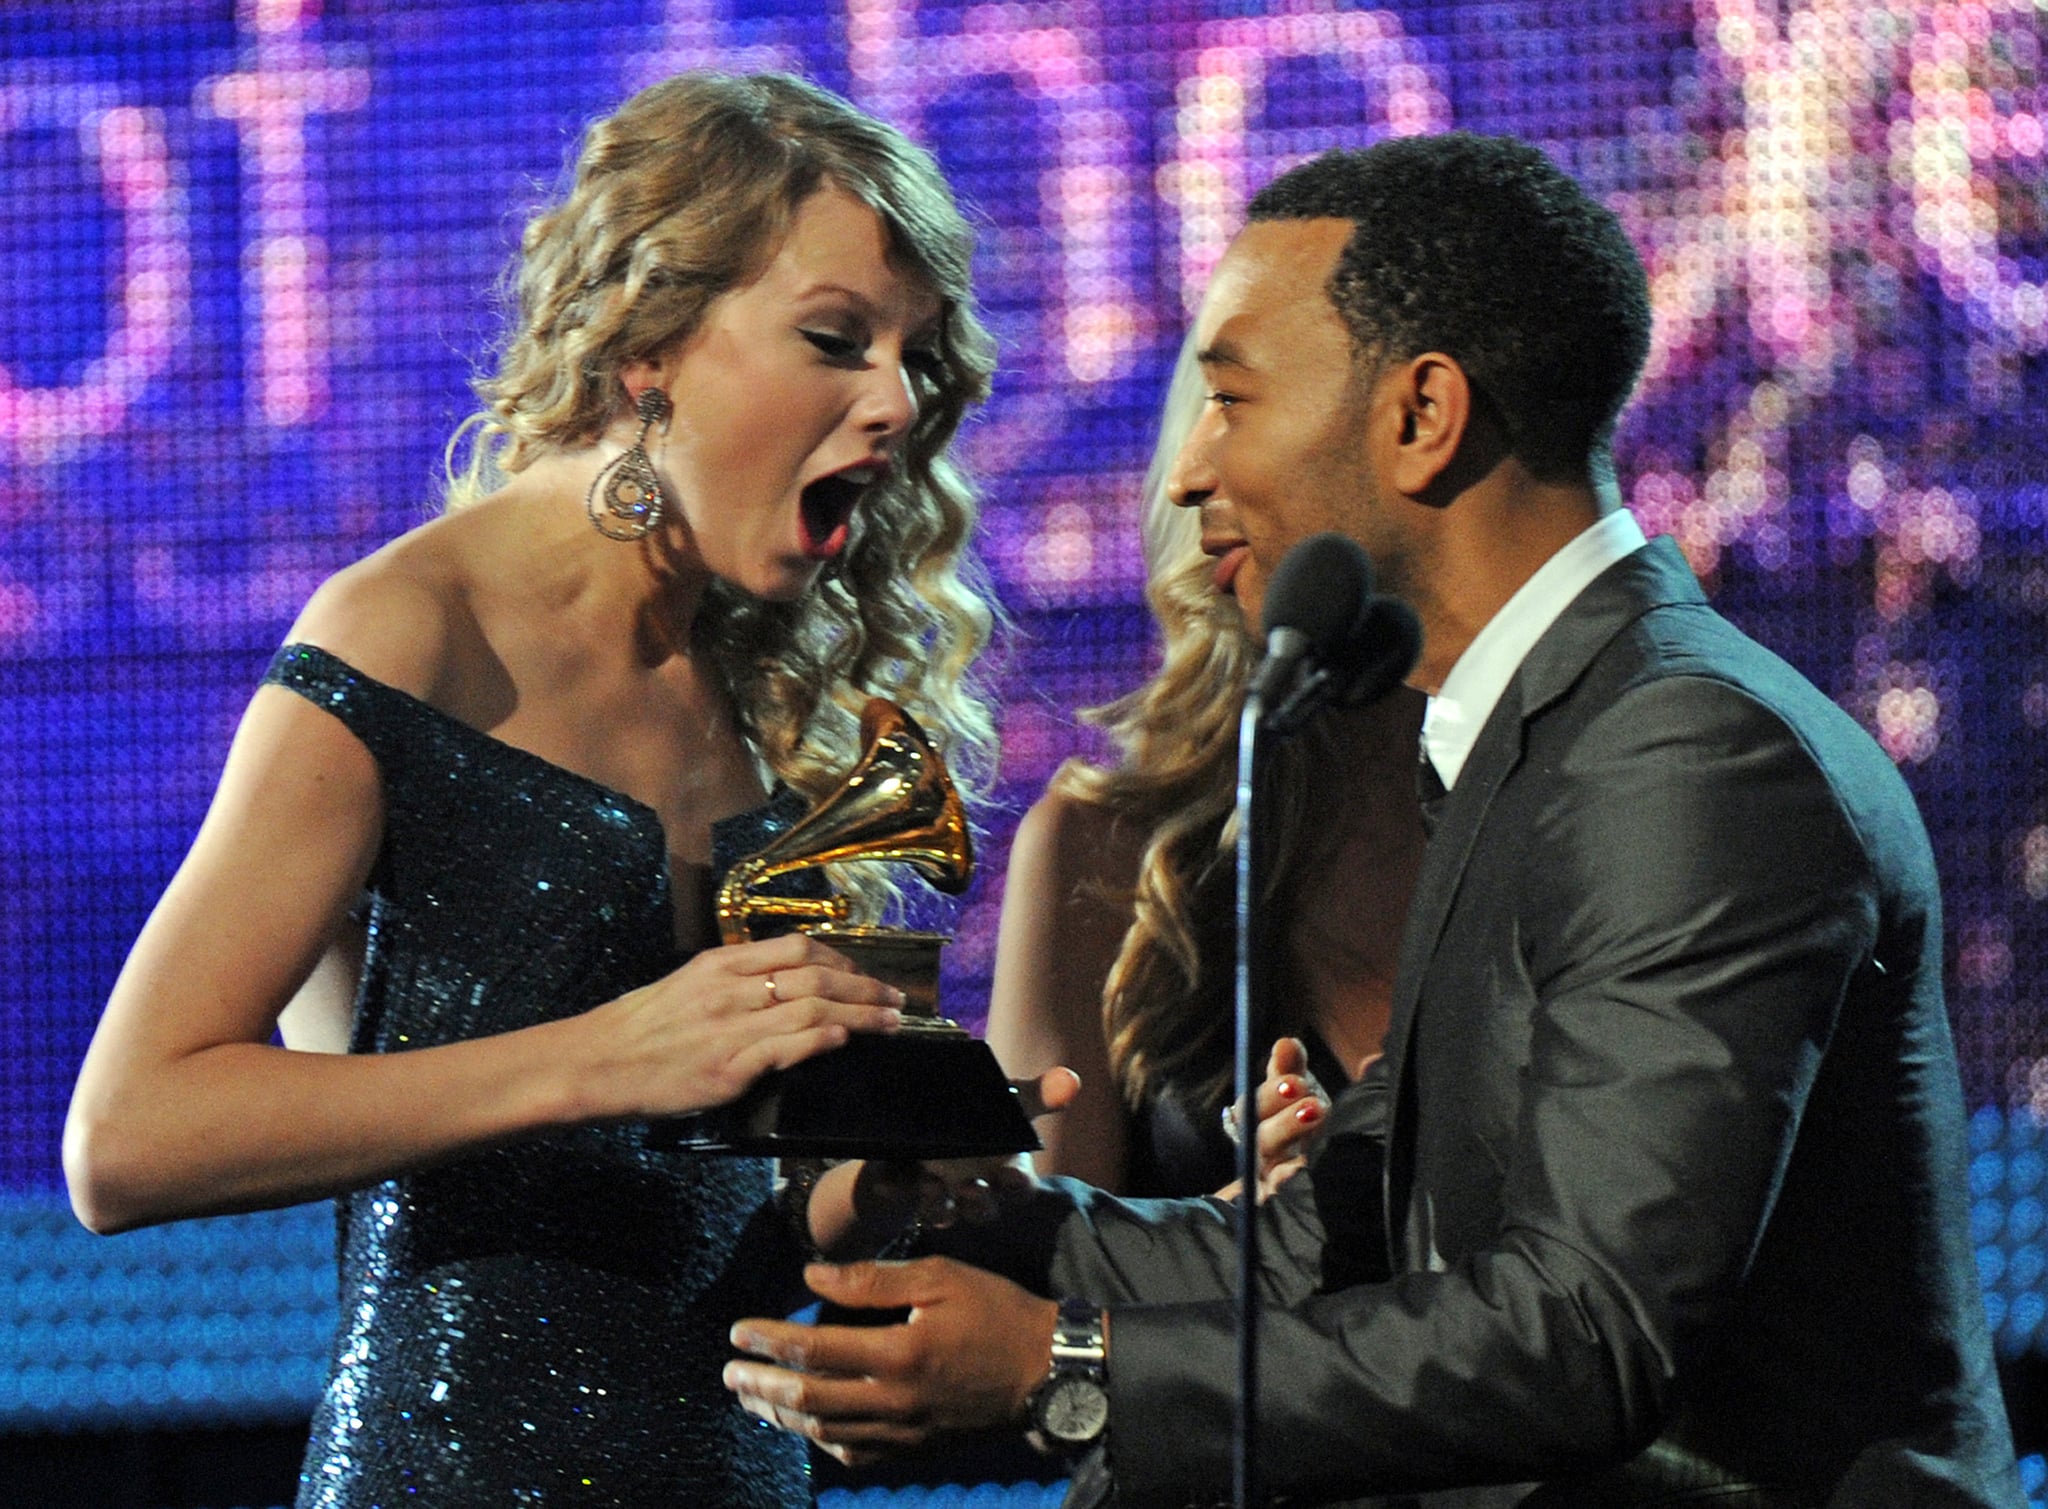 The look on Taylor Swift's face said it all when she was presented with one of four trophies during the 2010 award show.